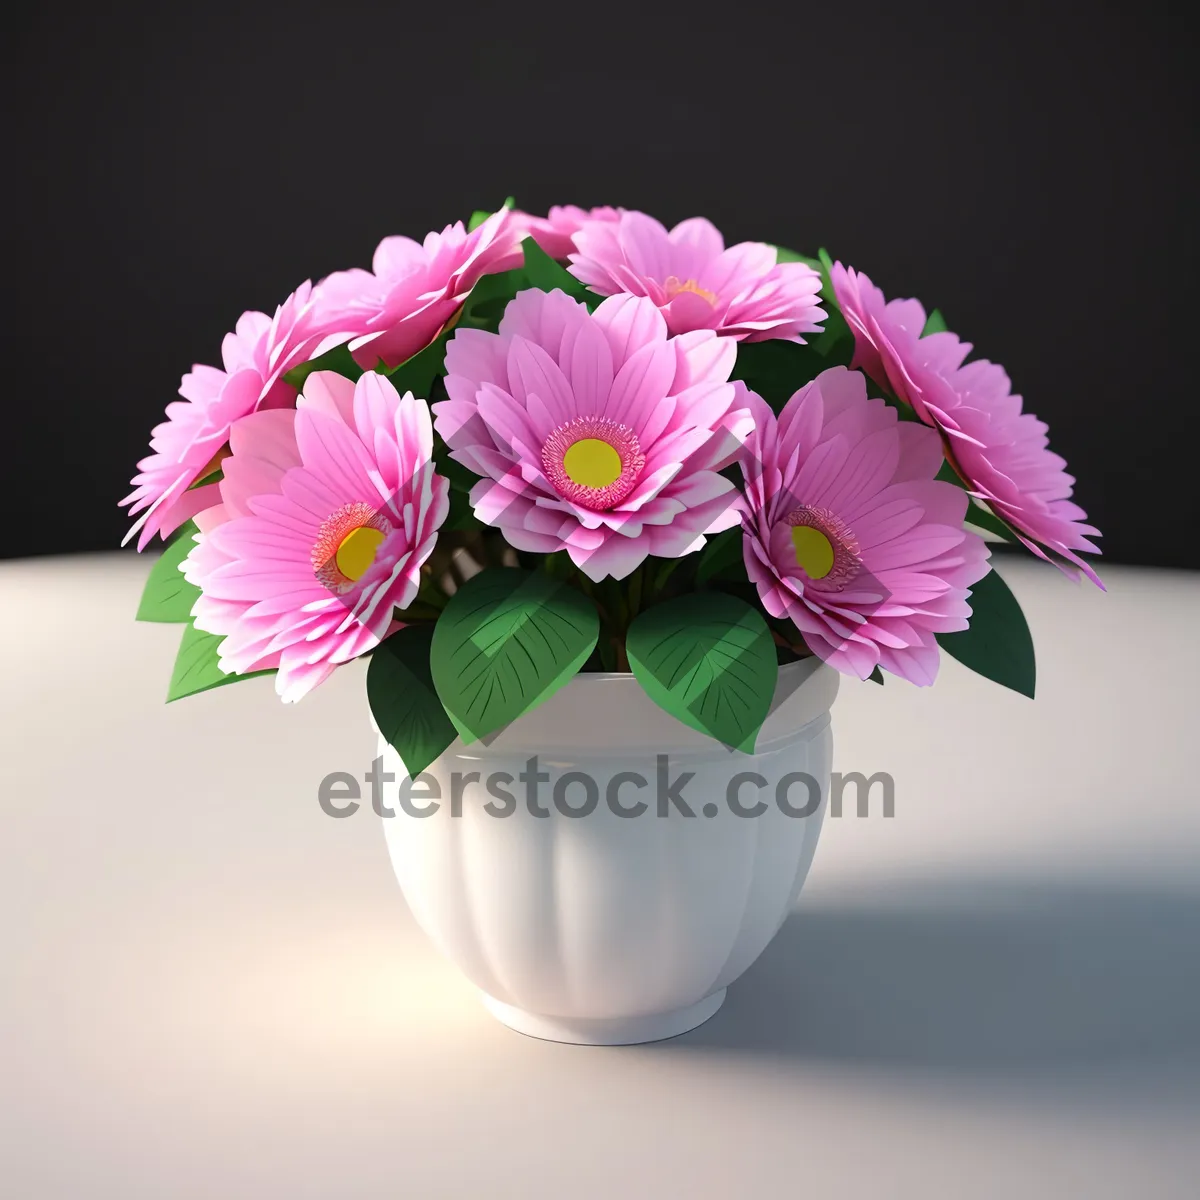 Picture of Vibrant Blooms: A Burst of Pink Floral Beauty